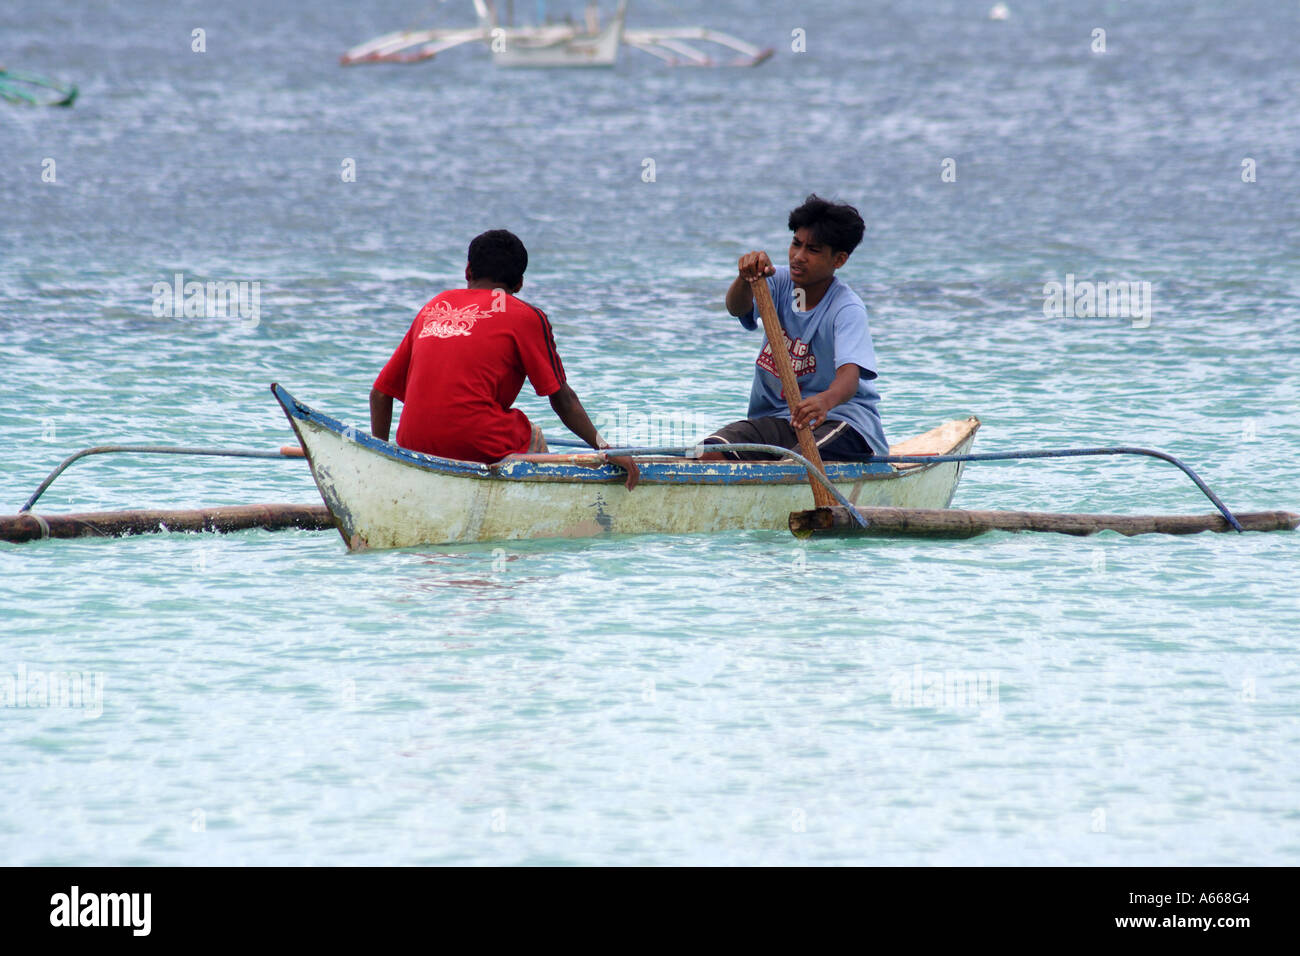 Boracay, Philippine Islands, two young men rowing an outrigger canoe Stock Photo